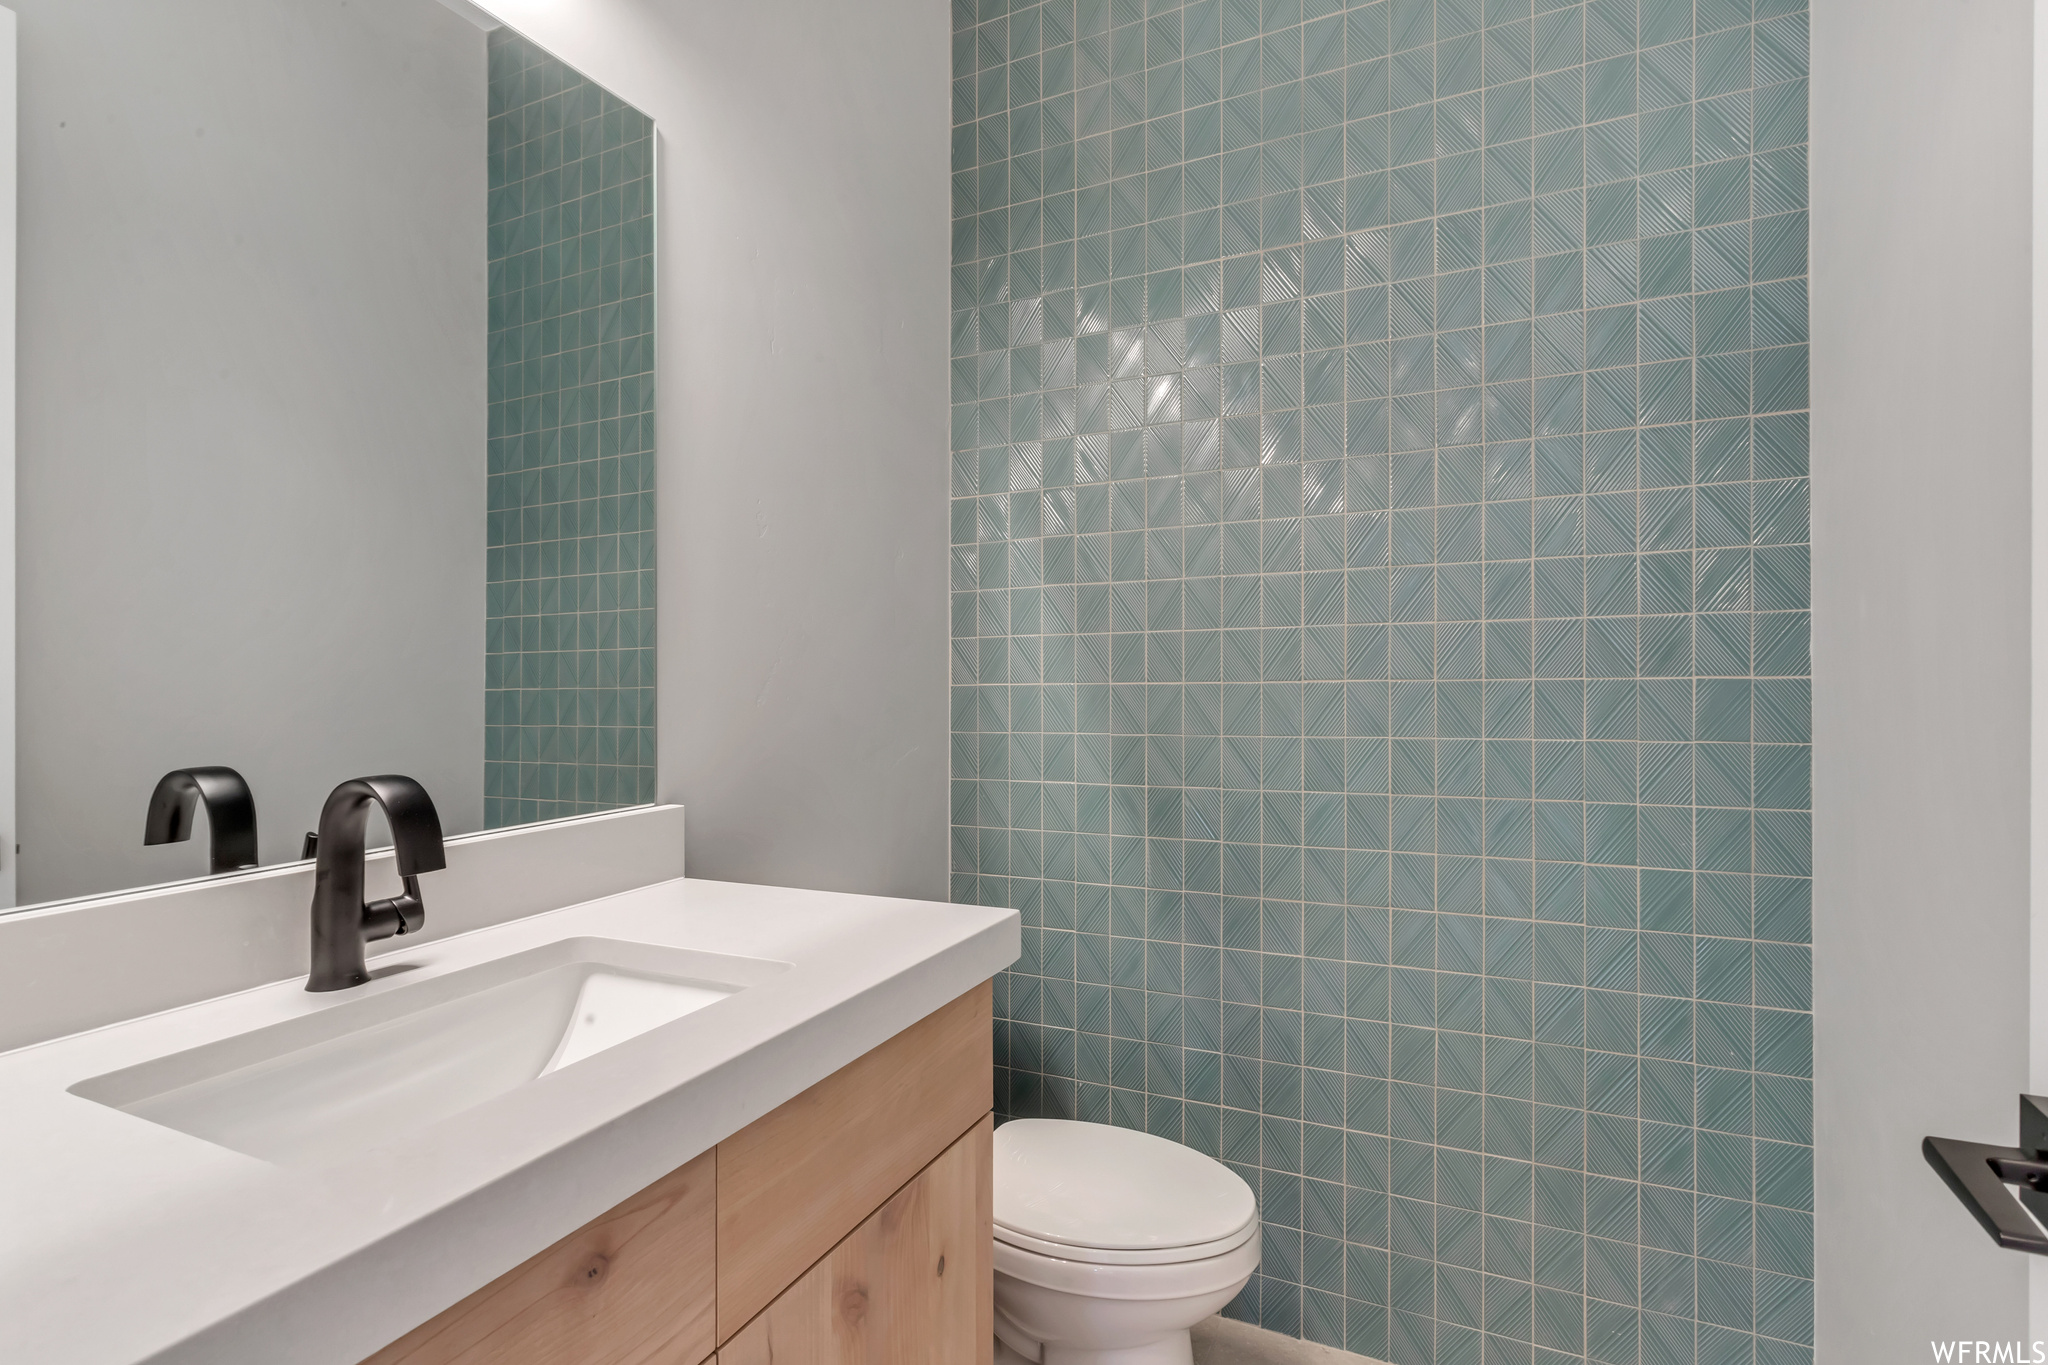 This half bath features a specialty tile wall chosen by the homeowner